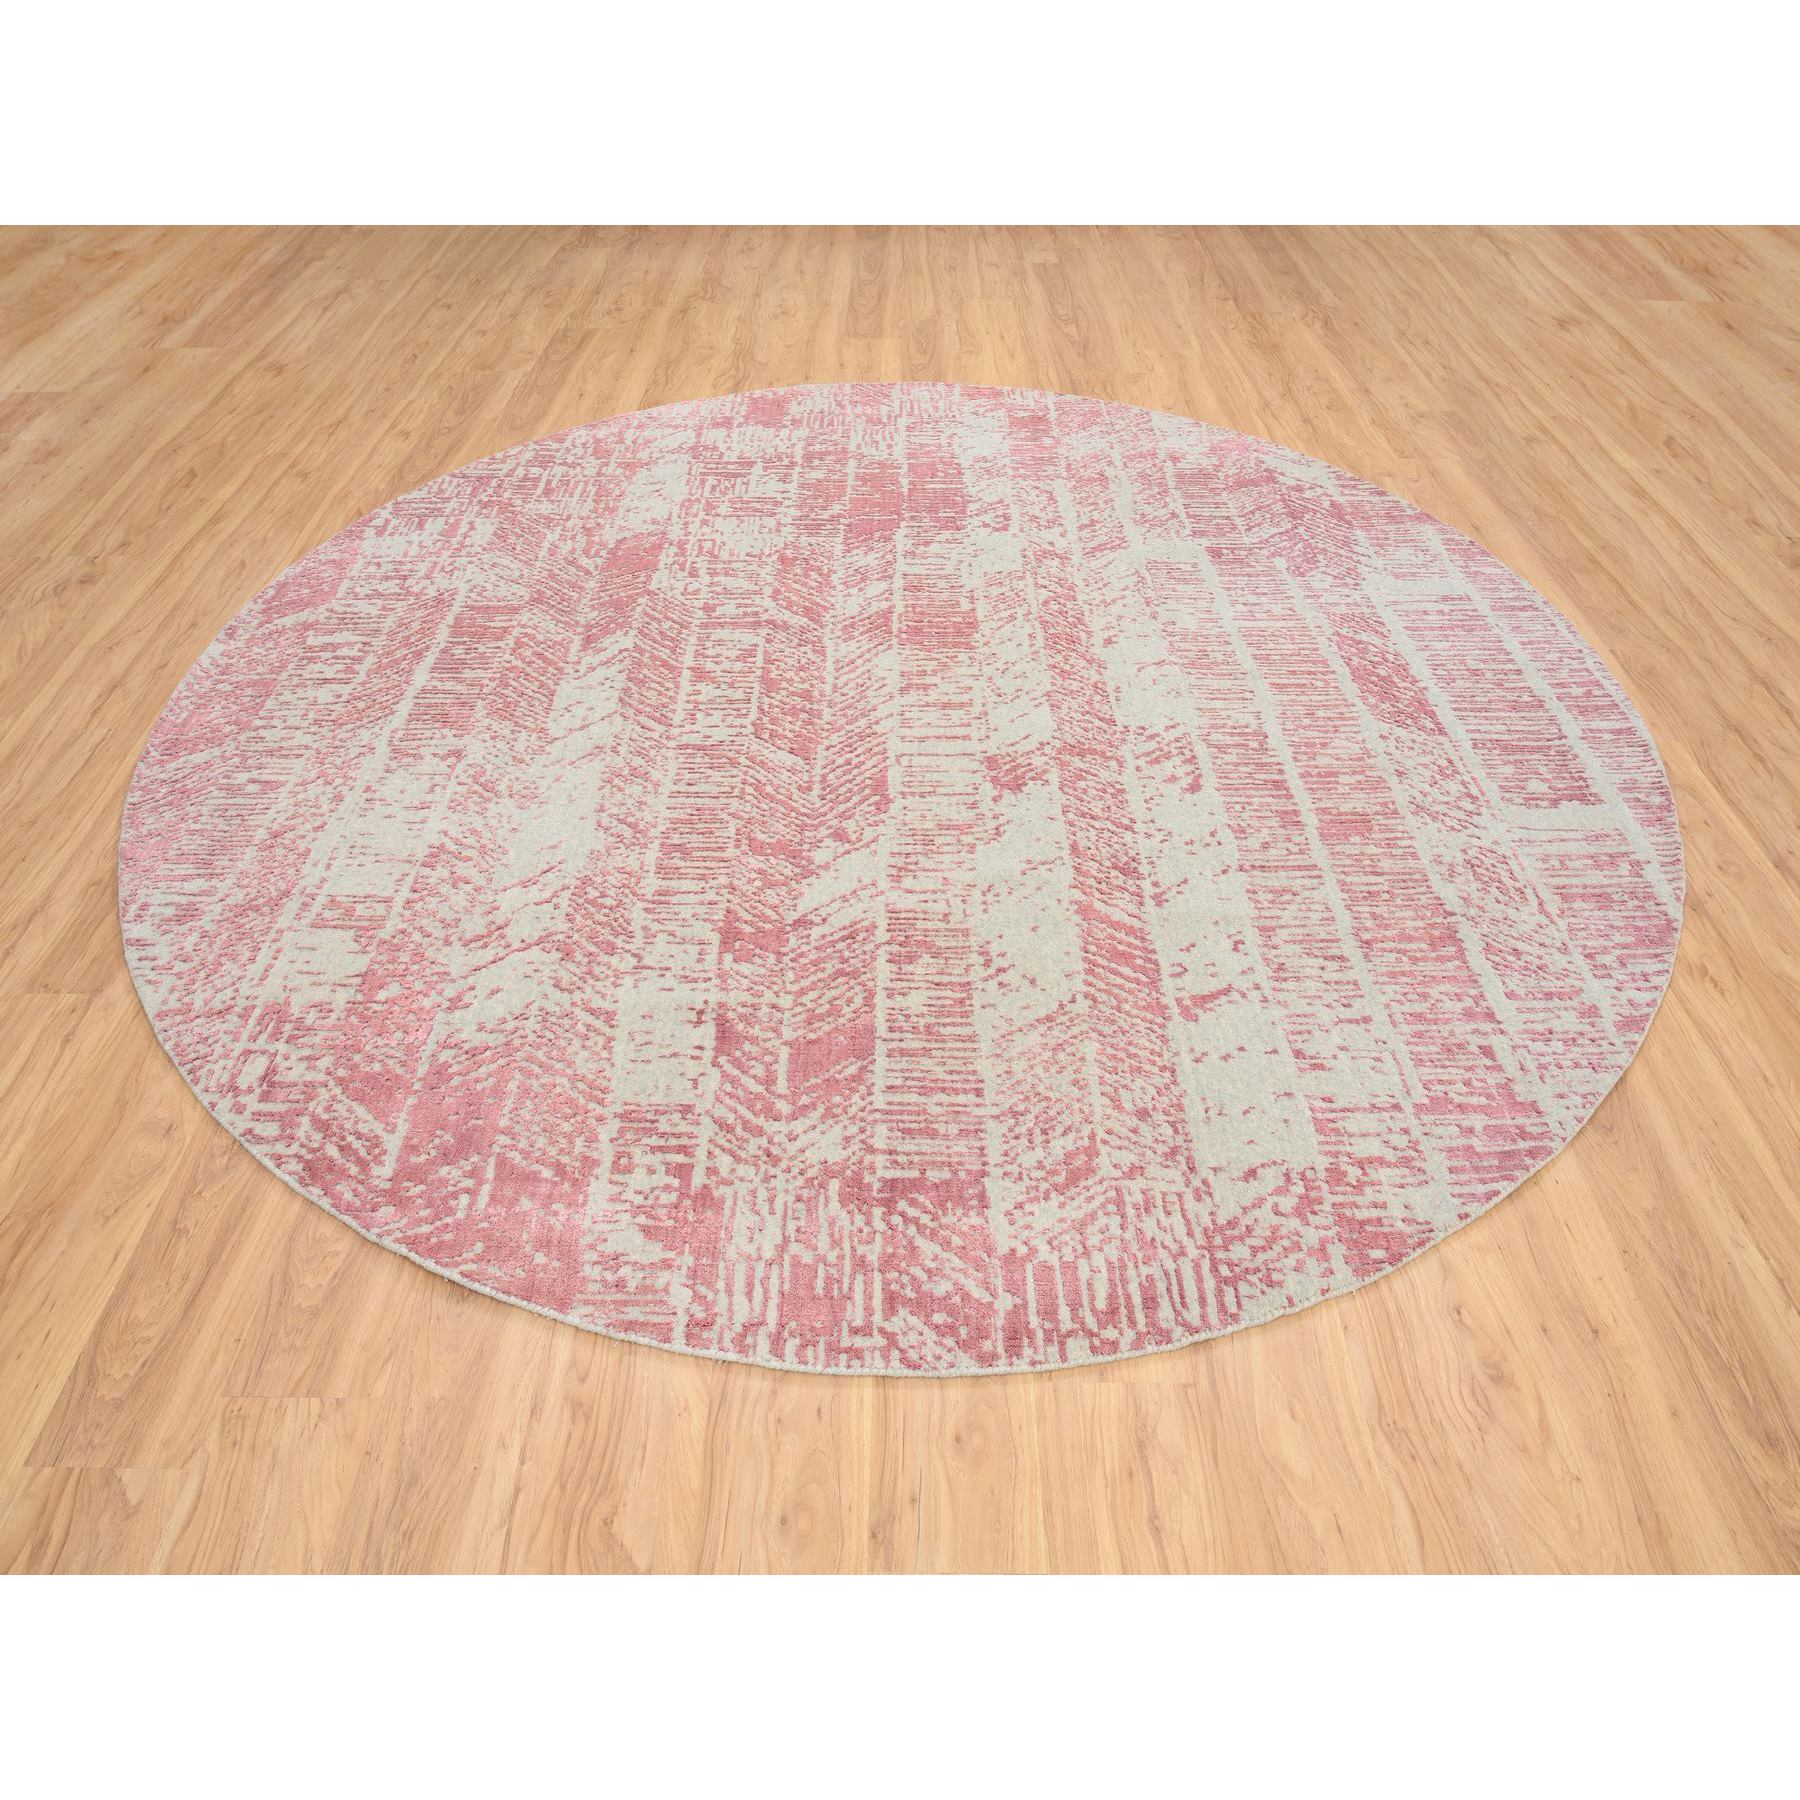 10'x10' Rose Pink, Wool and Art Silk Jacquard Hand Loomed, All Over Design, Round Oriental Rug 